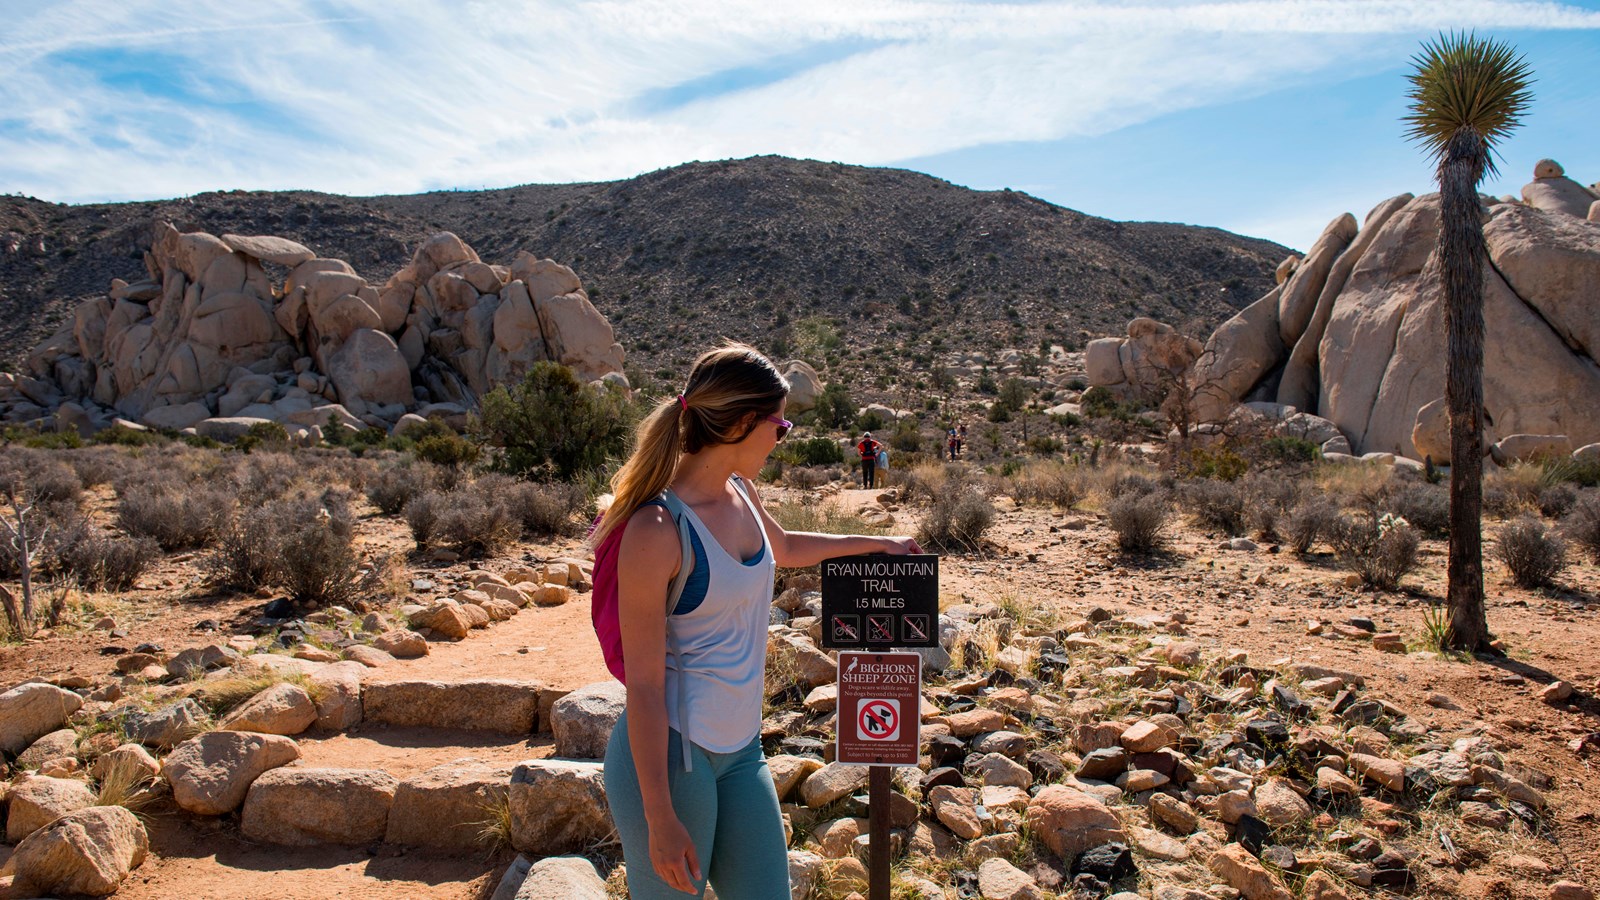 A hiker next to a sign for Ryan Mountain by a dirt and rock trail heading towards a mountain.